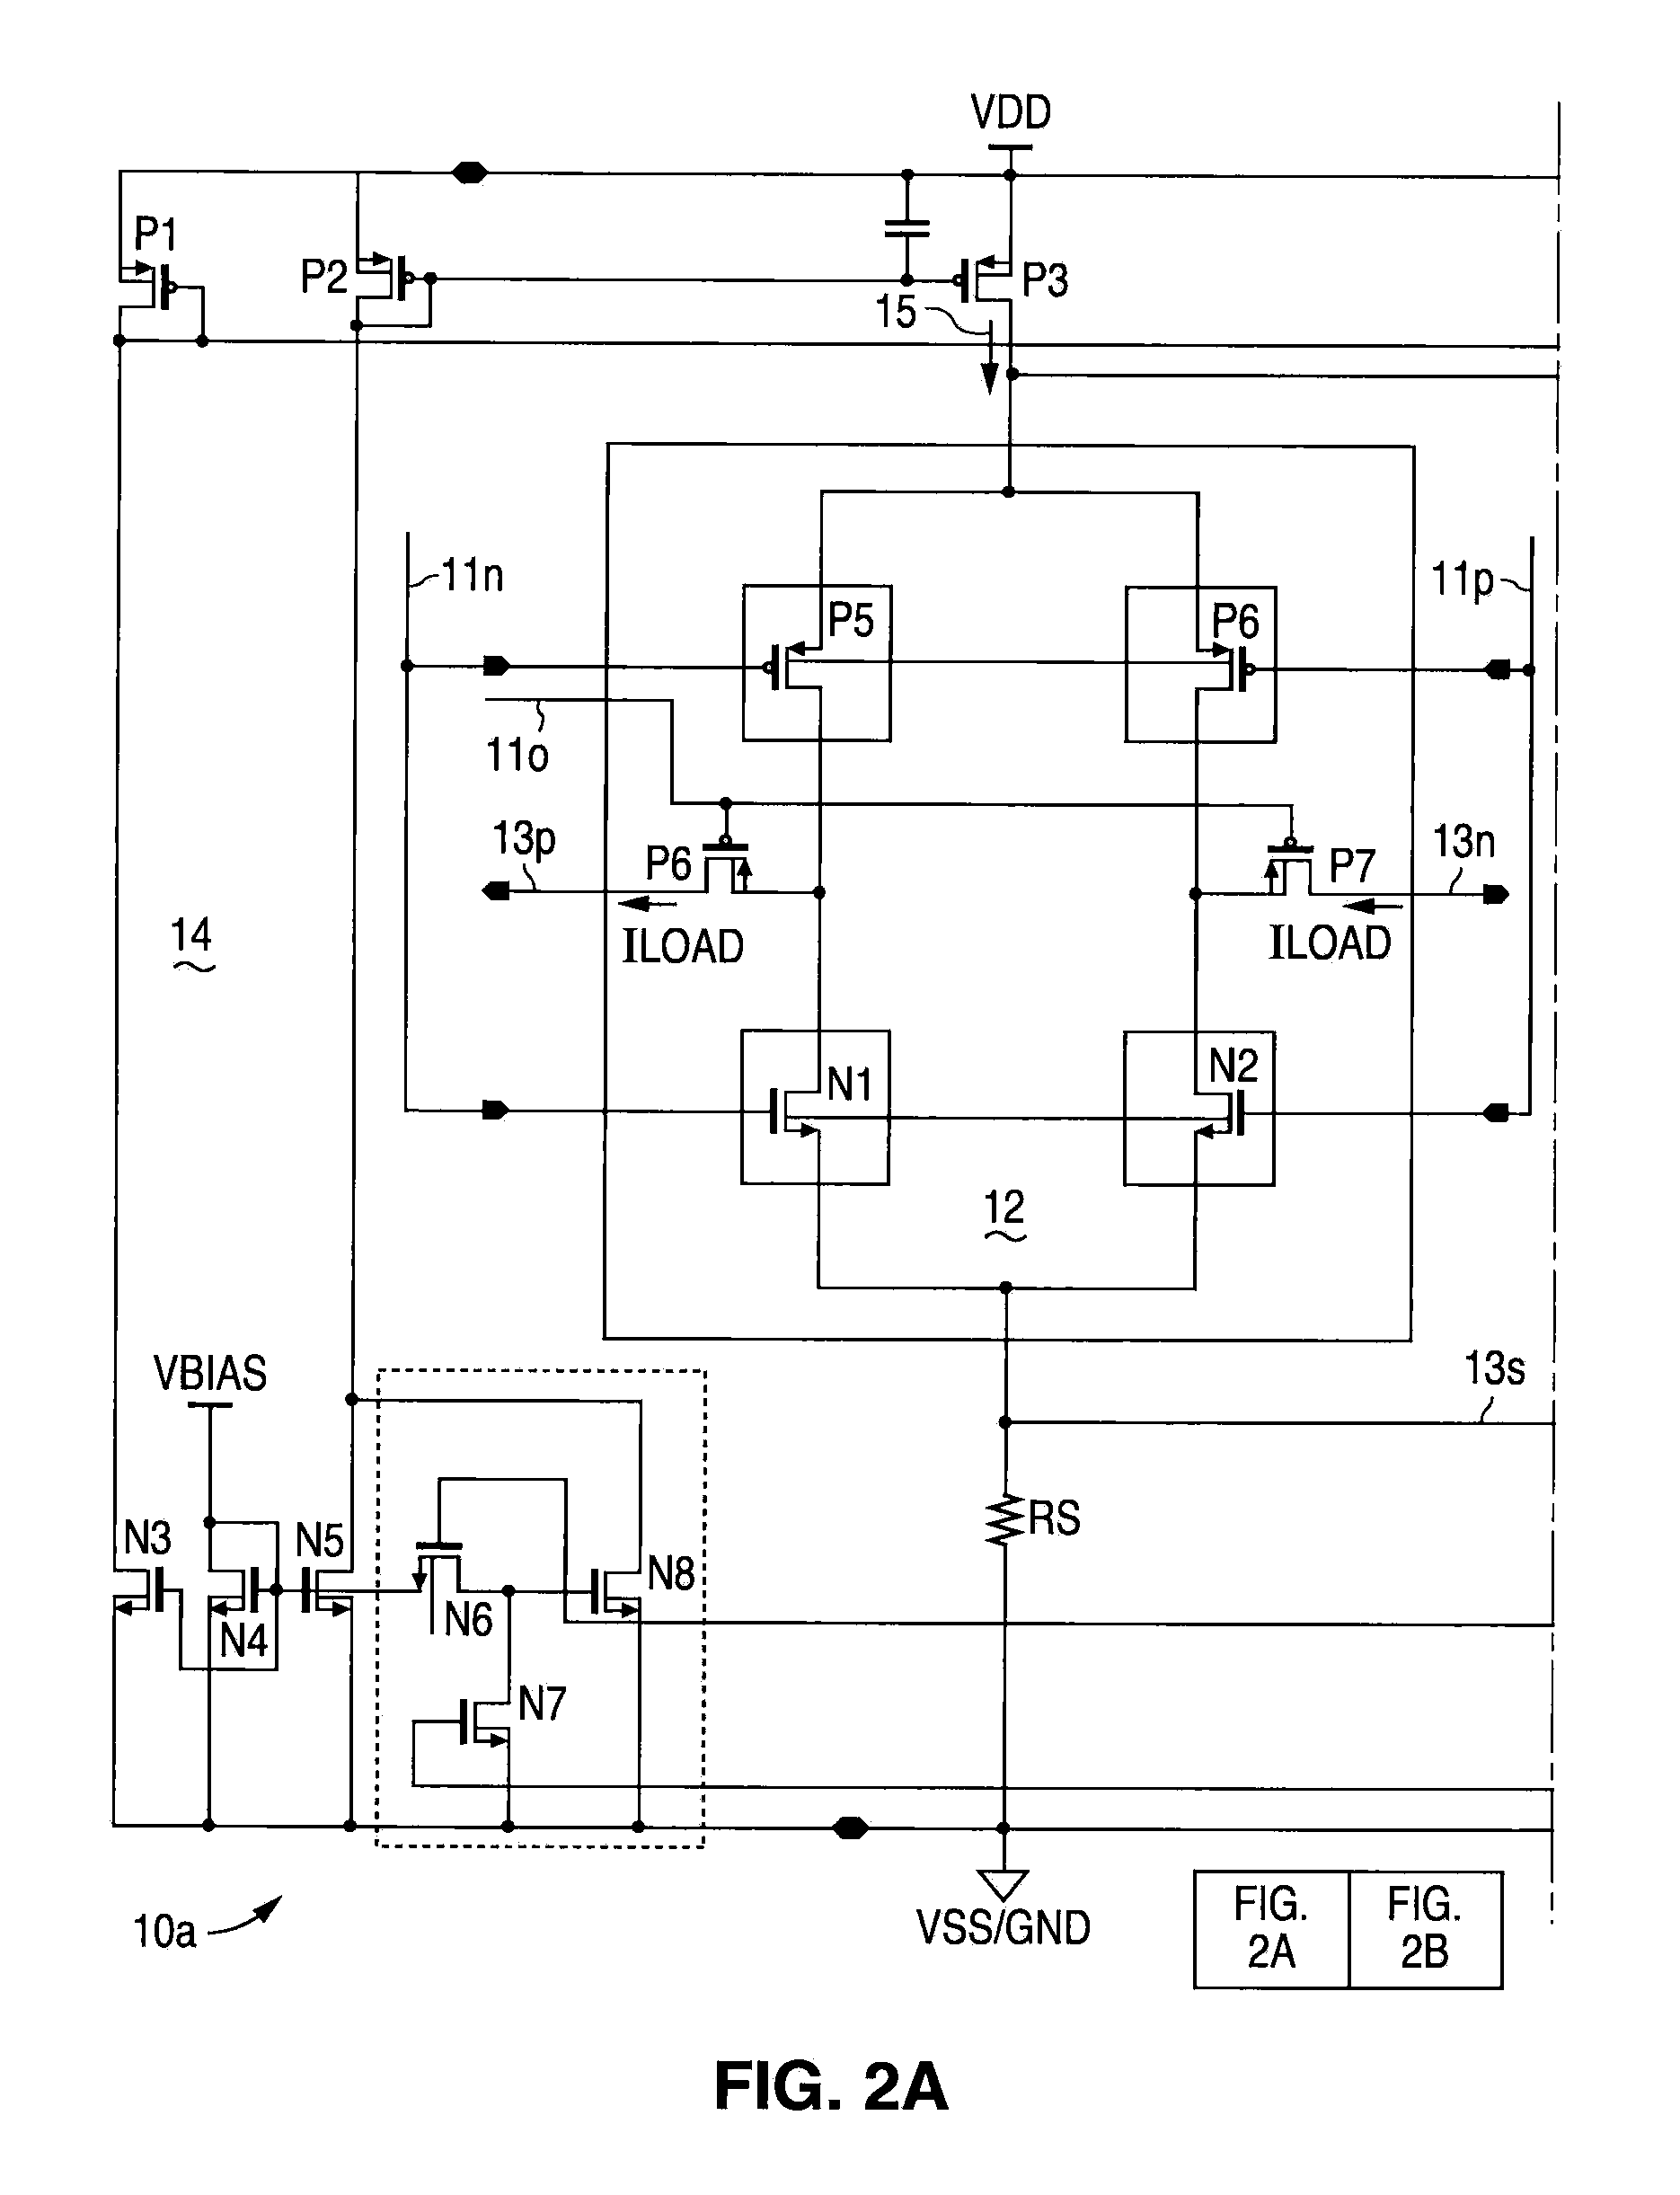 Low voltage differential signal (LVDS) transmitter with output power control